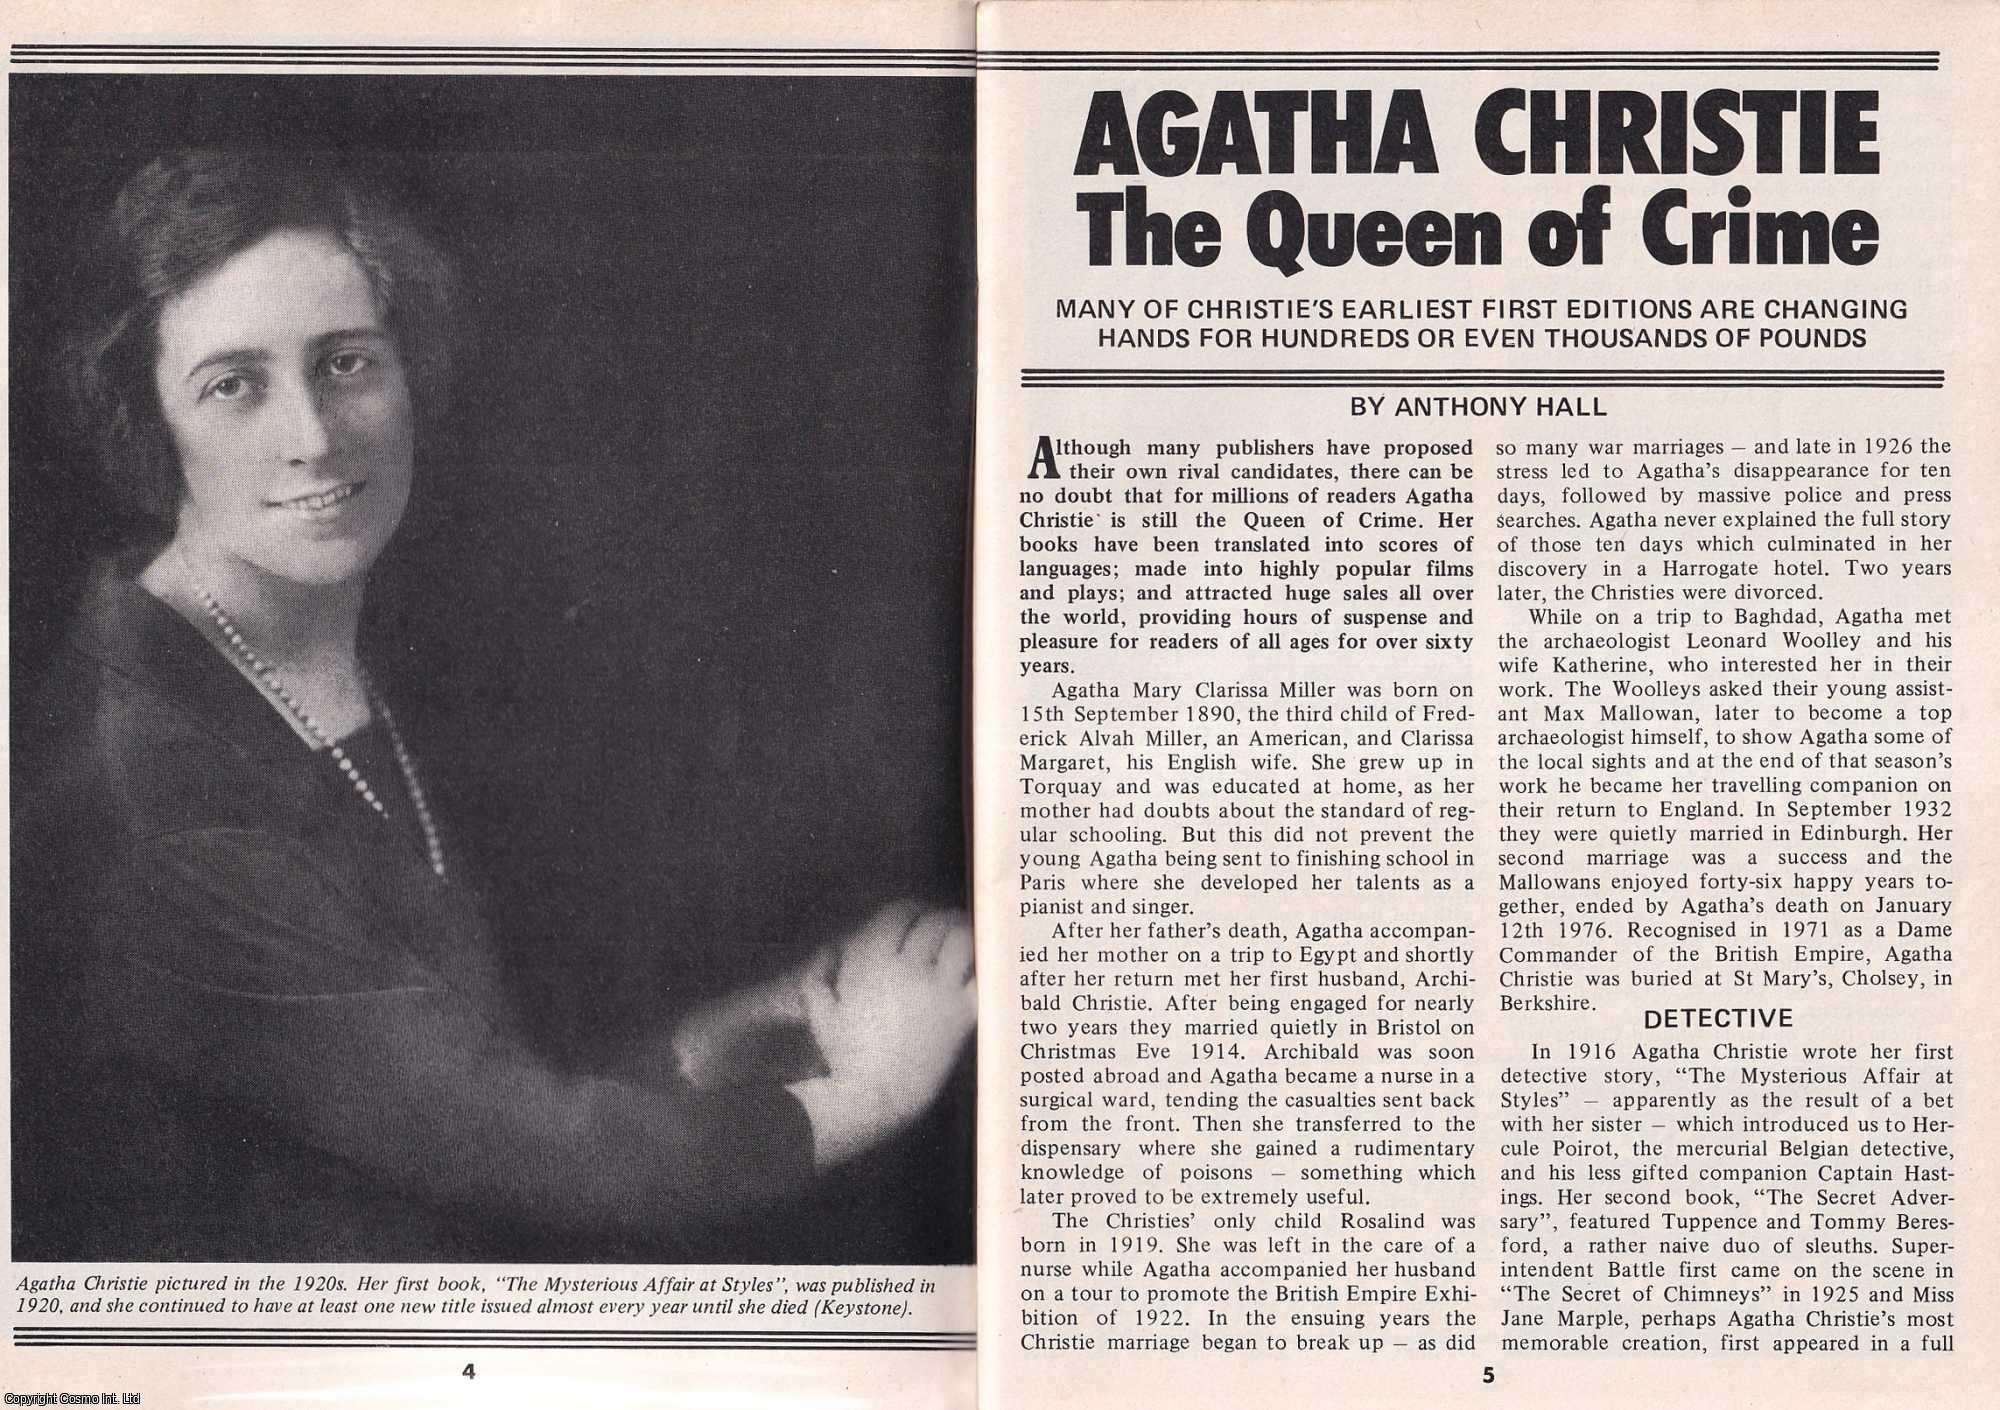 Anthony Hall - Agatha Christie. The Queen of Crime. This is an original article separated from an issue of The Book & Magazine Collector publication.